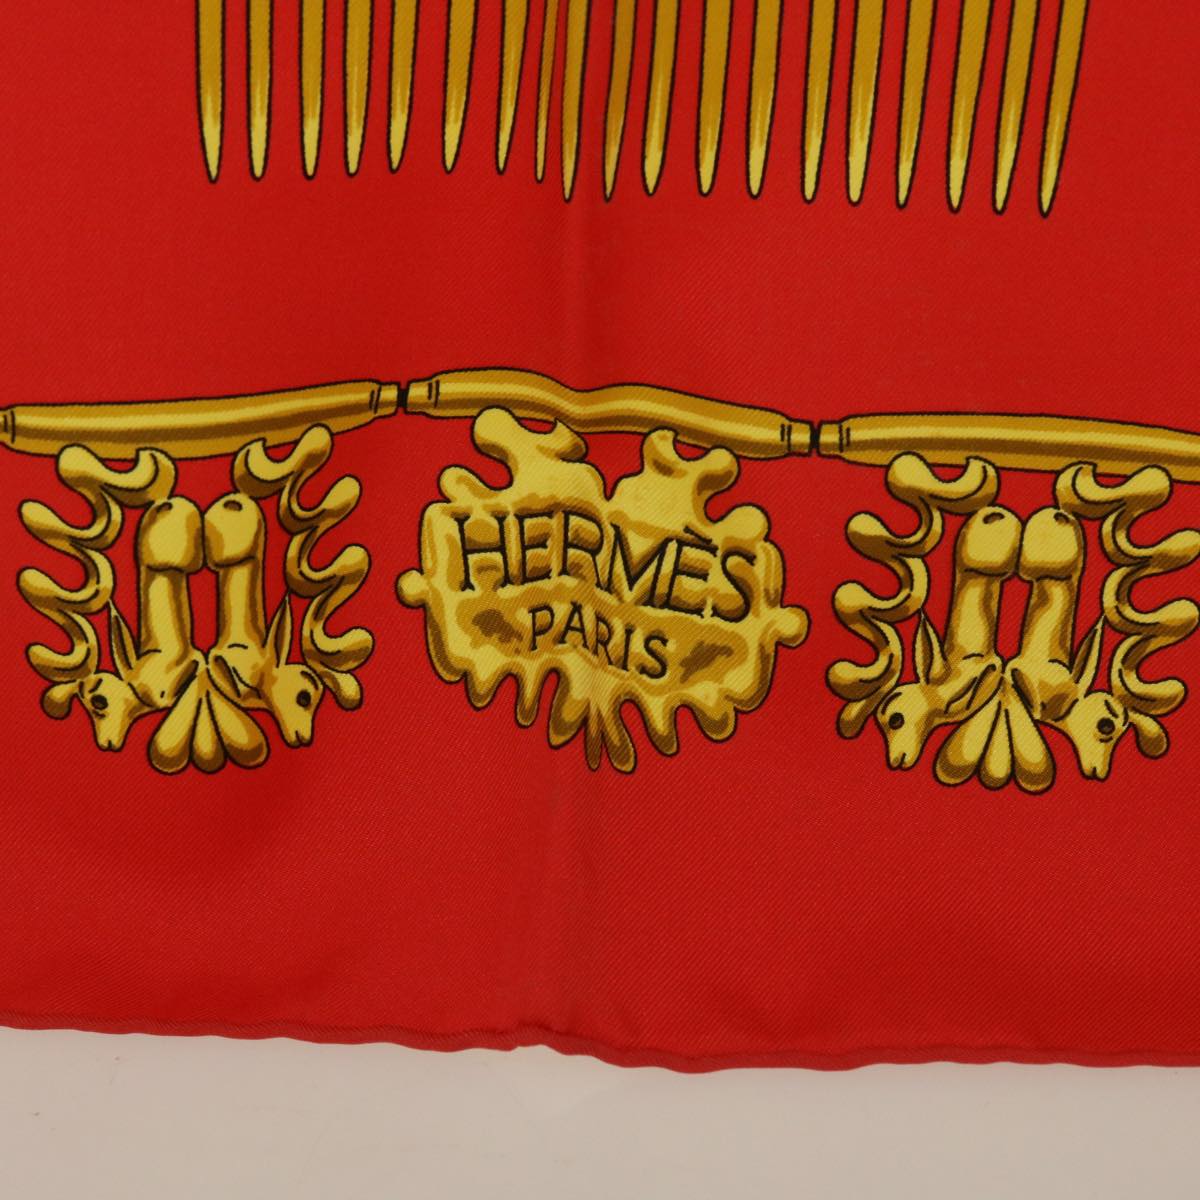 HERMES Carre 90 LES CAVAL D'OR Scarf Silk Red Auth cl815